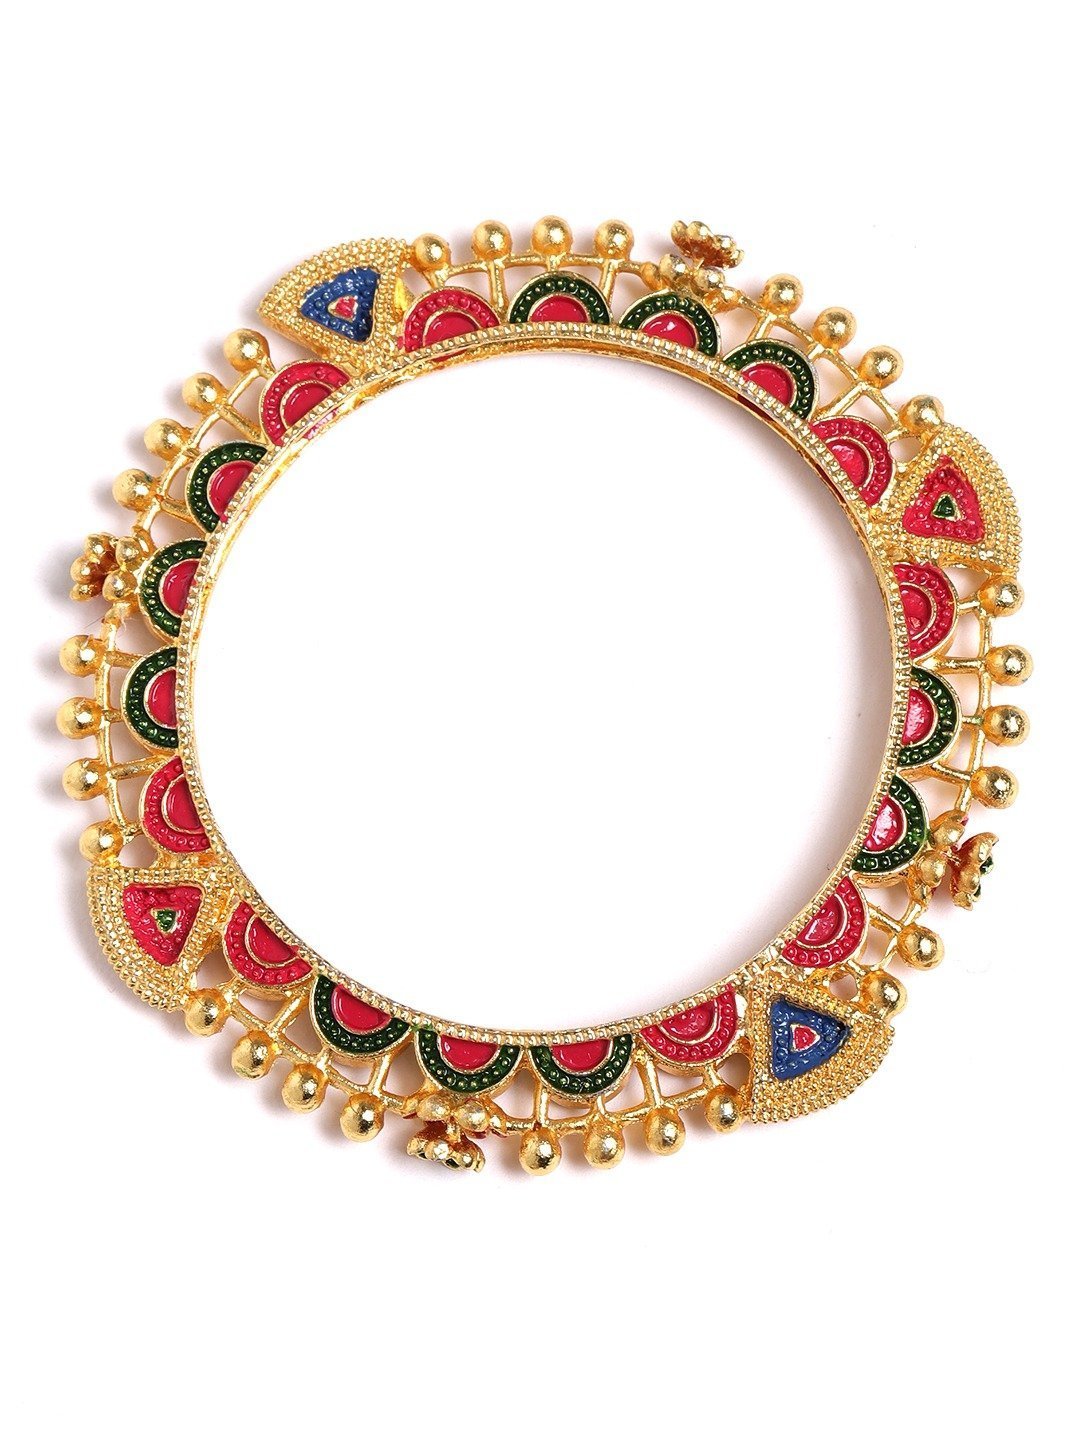 Women's Set of 2 Gold Plated Red and Blue Colored Embellished Bangles - Priyaasi